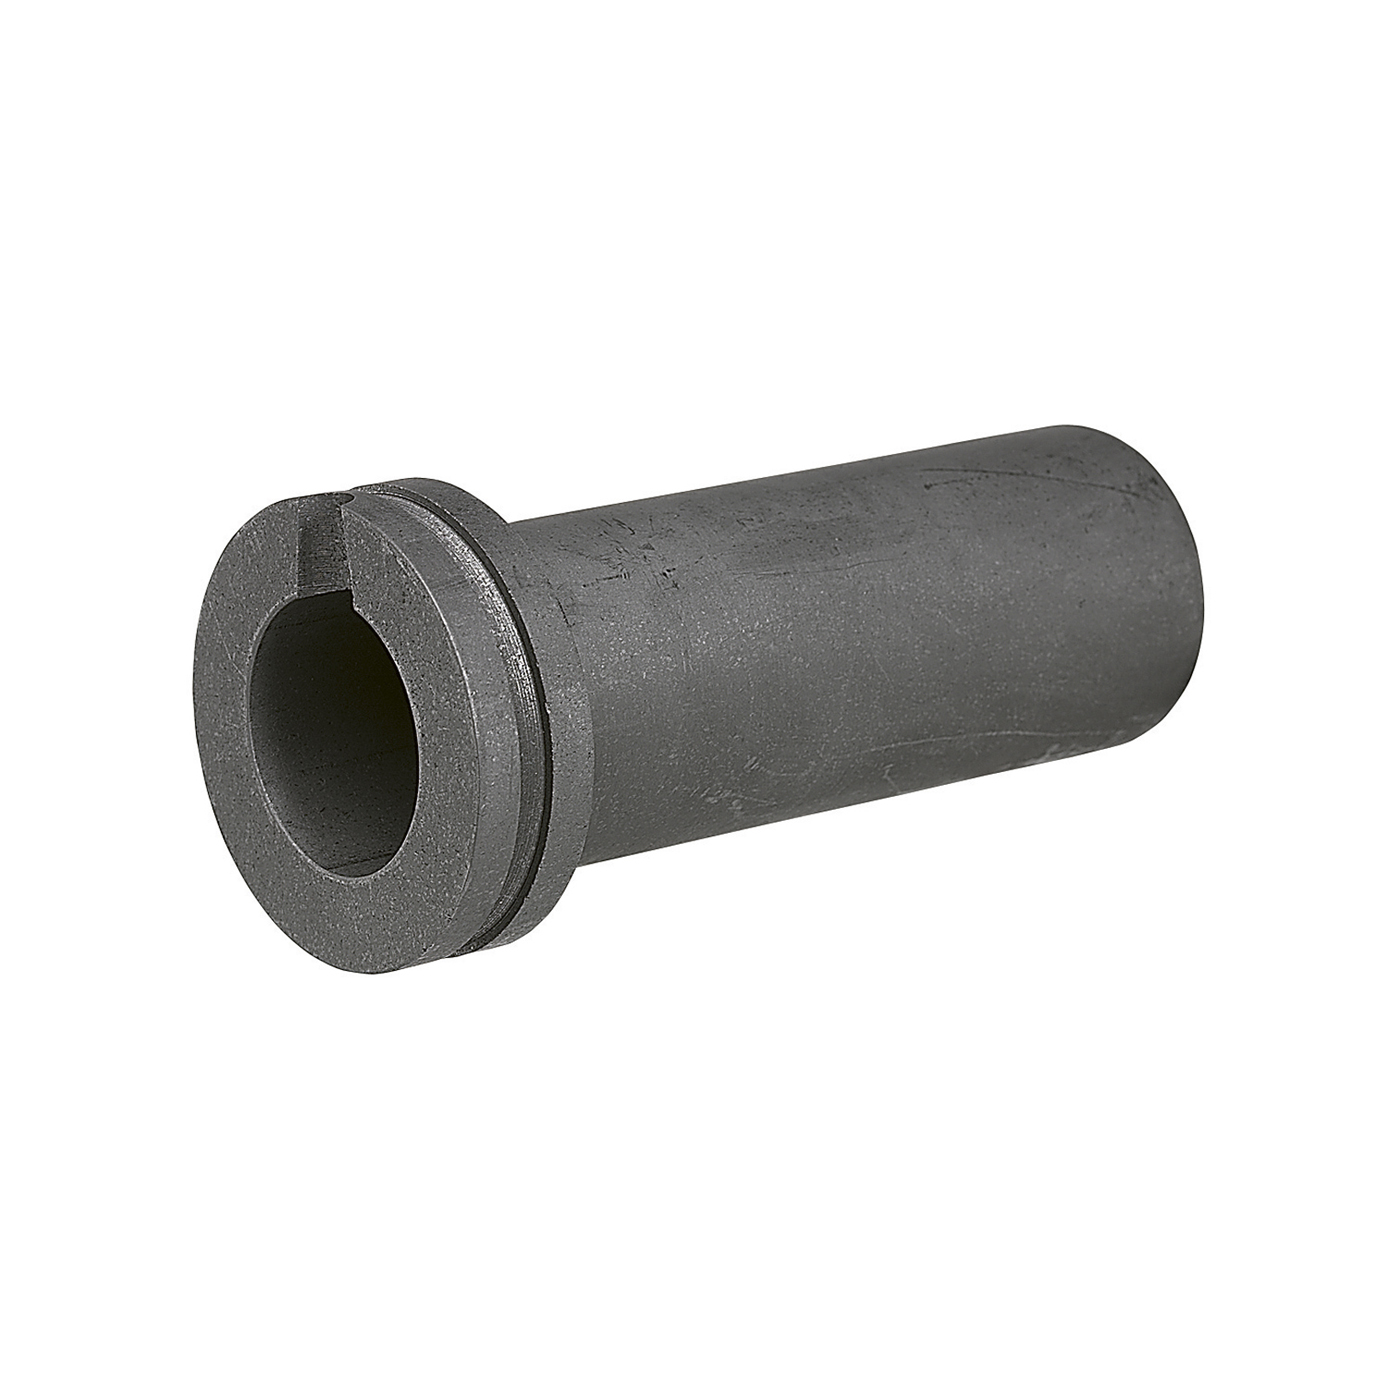 Graphite Crucible, for Melting Furnace 2 kg Gold - 1 piece